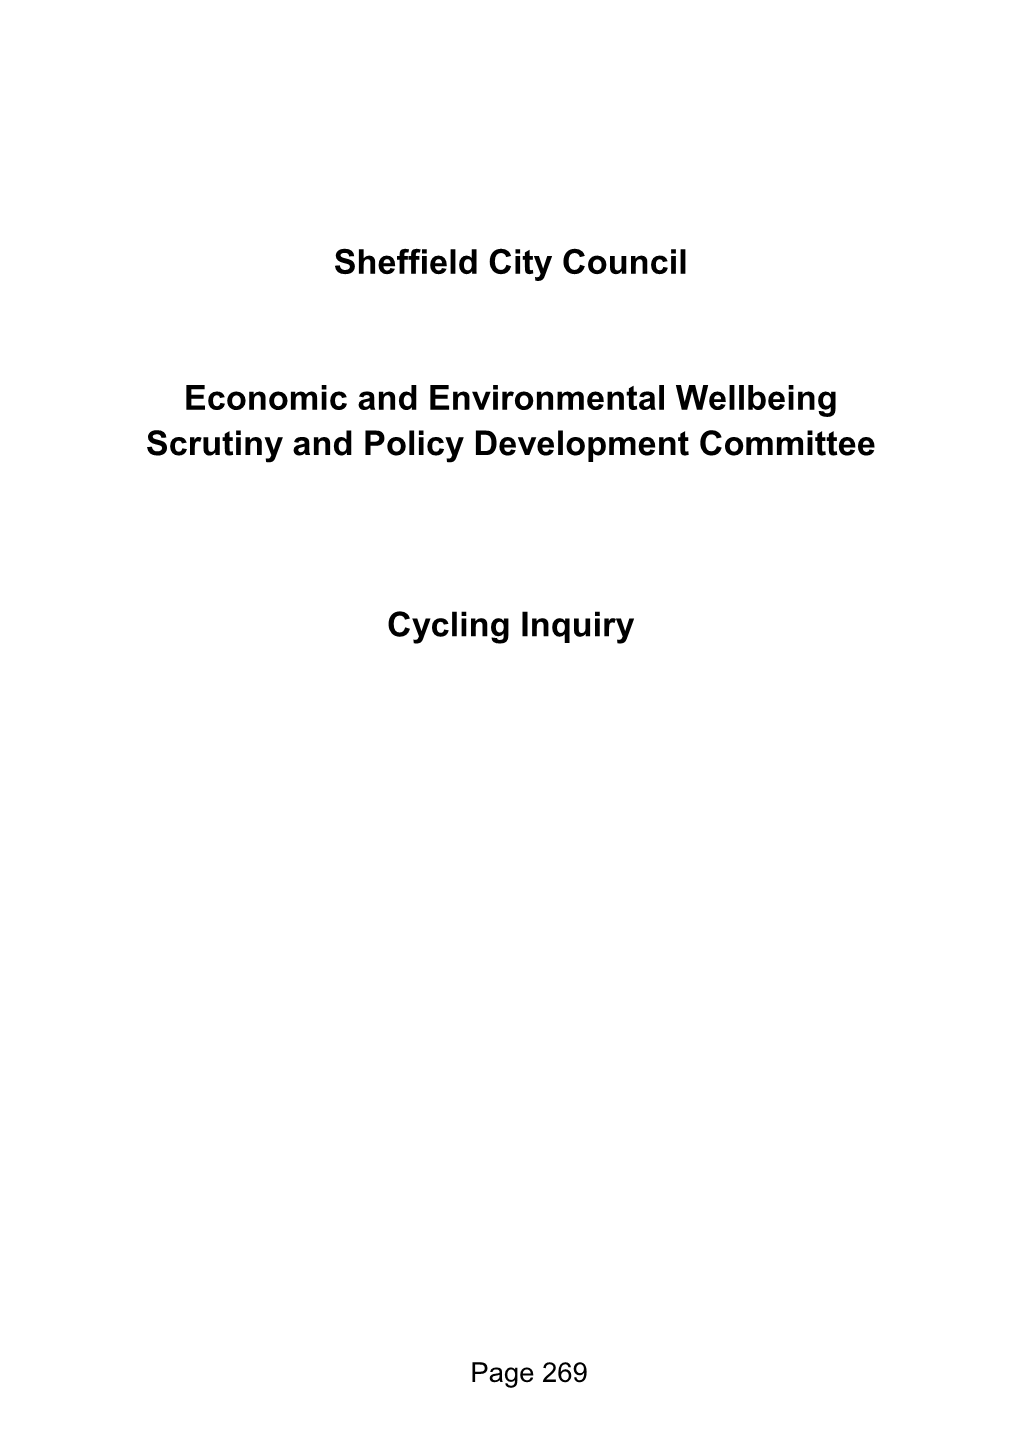 Cycling Inquiry Report Final